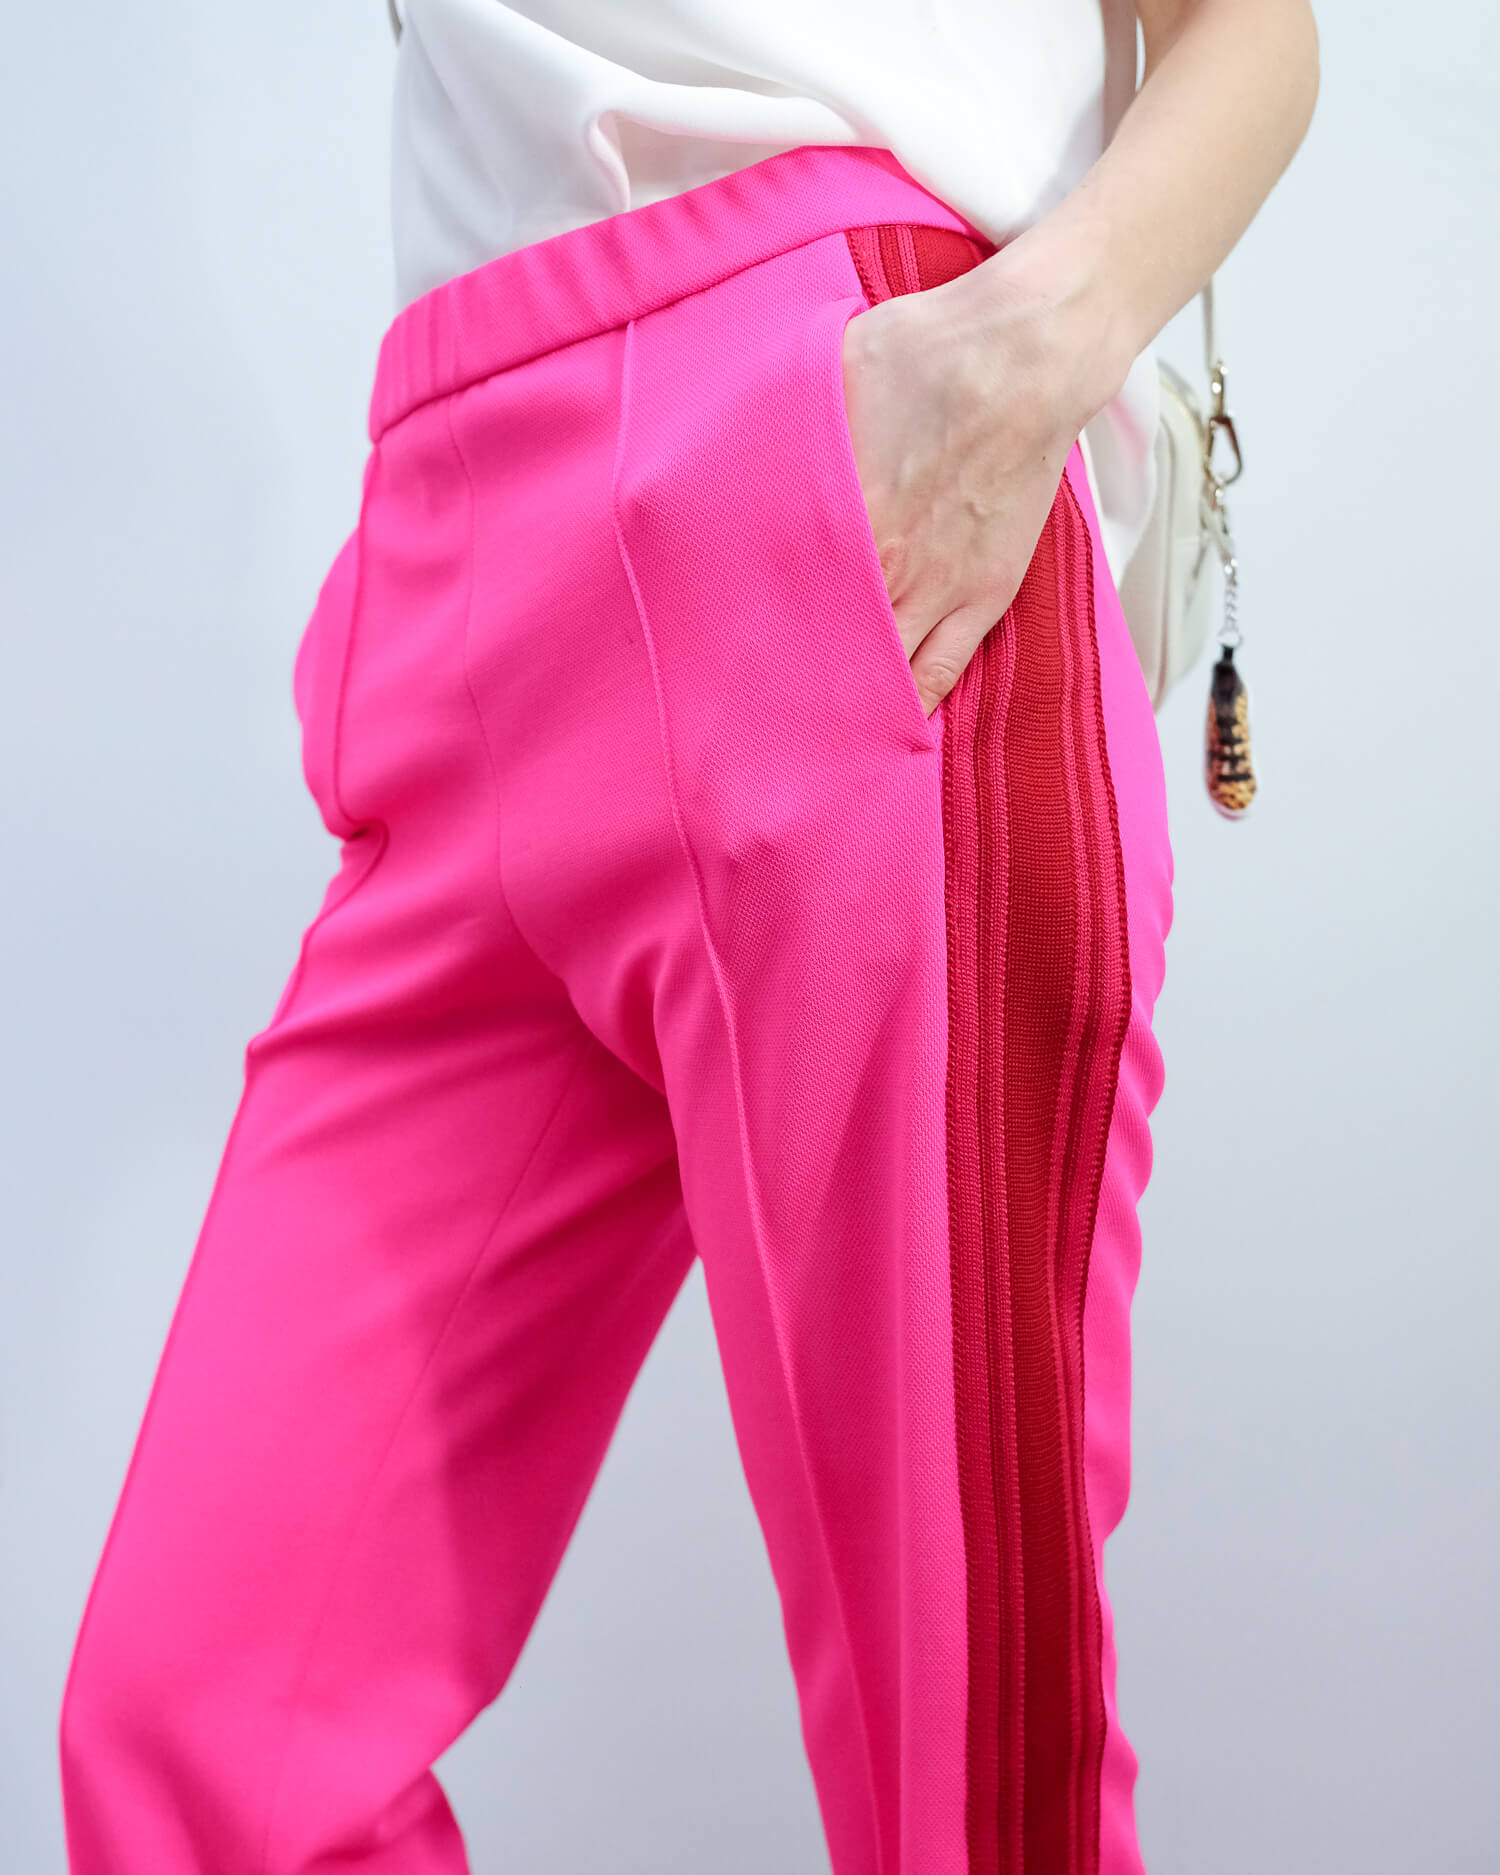 GG Kelly pant in pink glo